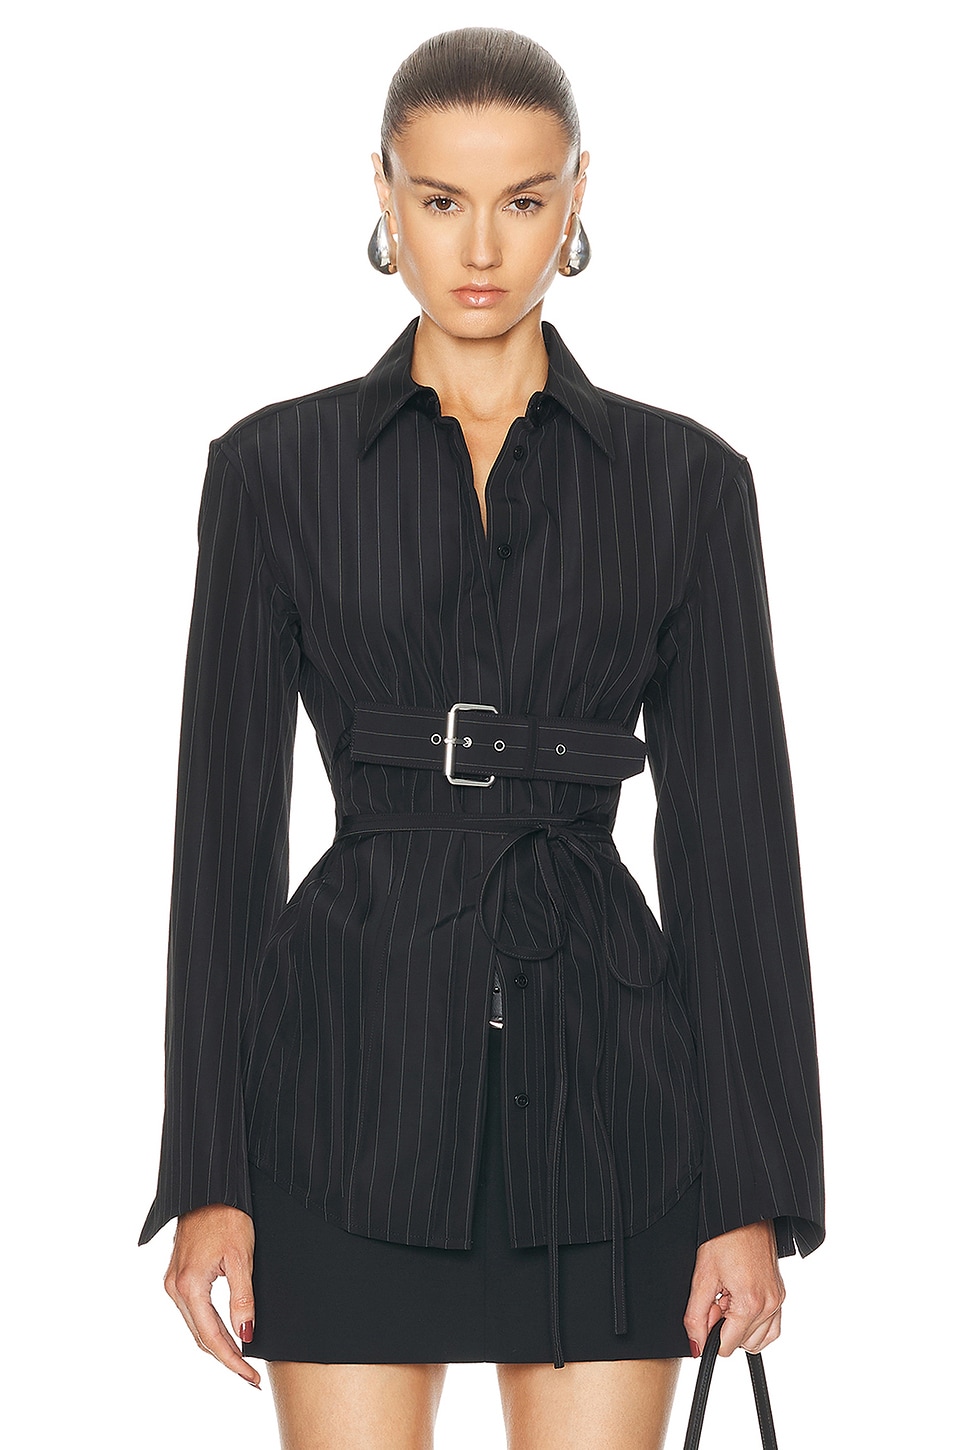 Image 1 of Alexander Wang Long Sleeve Top With Back Slit And Belt in Black & White